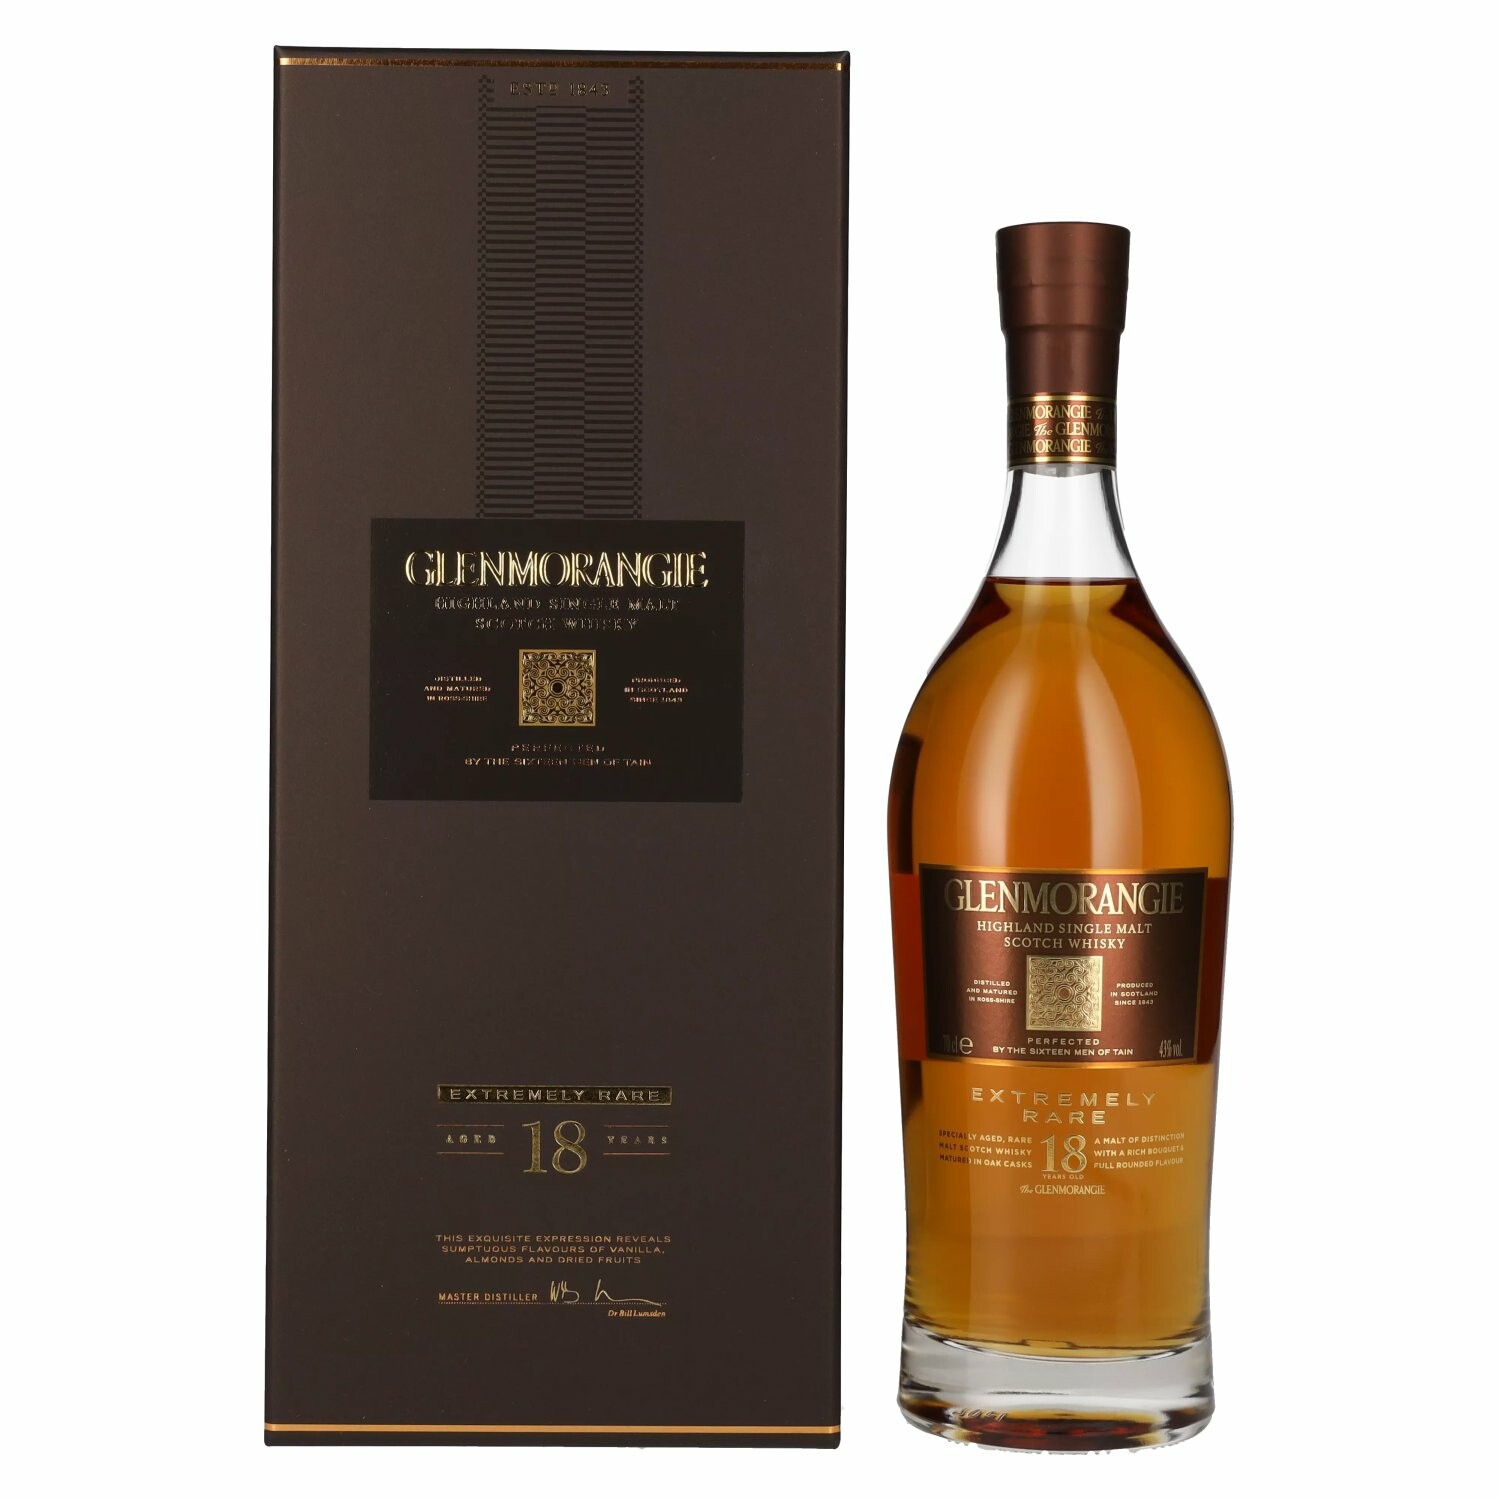 Glenmorangie EXTREMELY RARE 18 Years Old Highland Single Malt 43% Vol. 0,7l in Giftbox